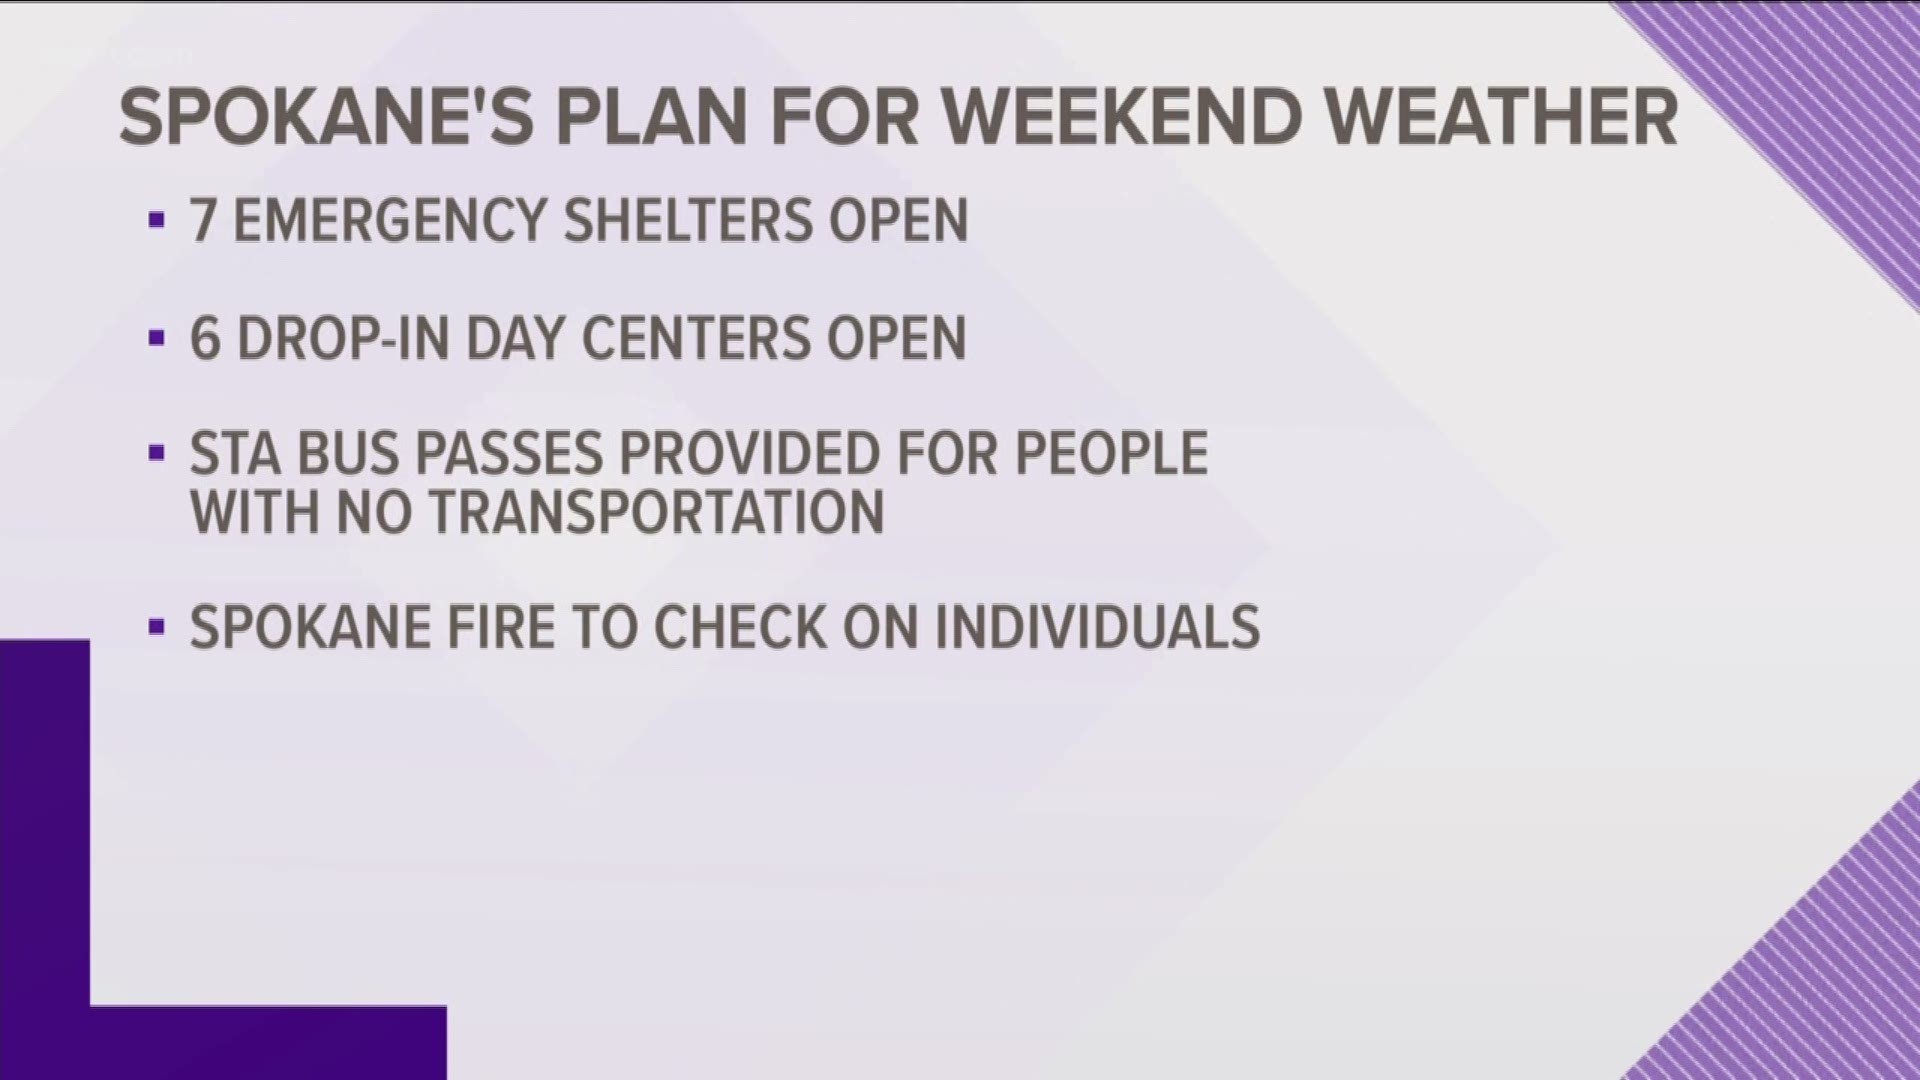 Spokane Mayor David Condon announced the city will open seven emergency shelters amid a winter storm warning issued for Sept. 28 until Oct. 1.